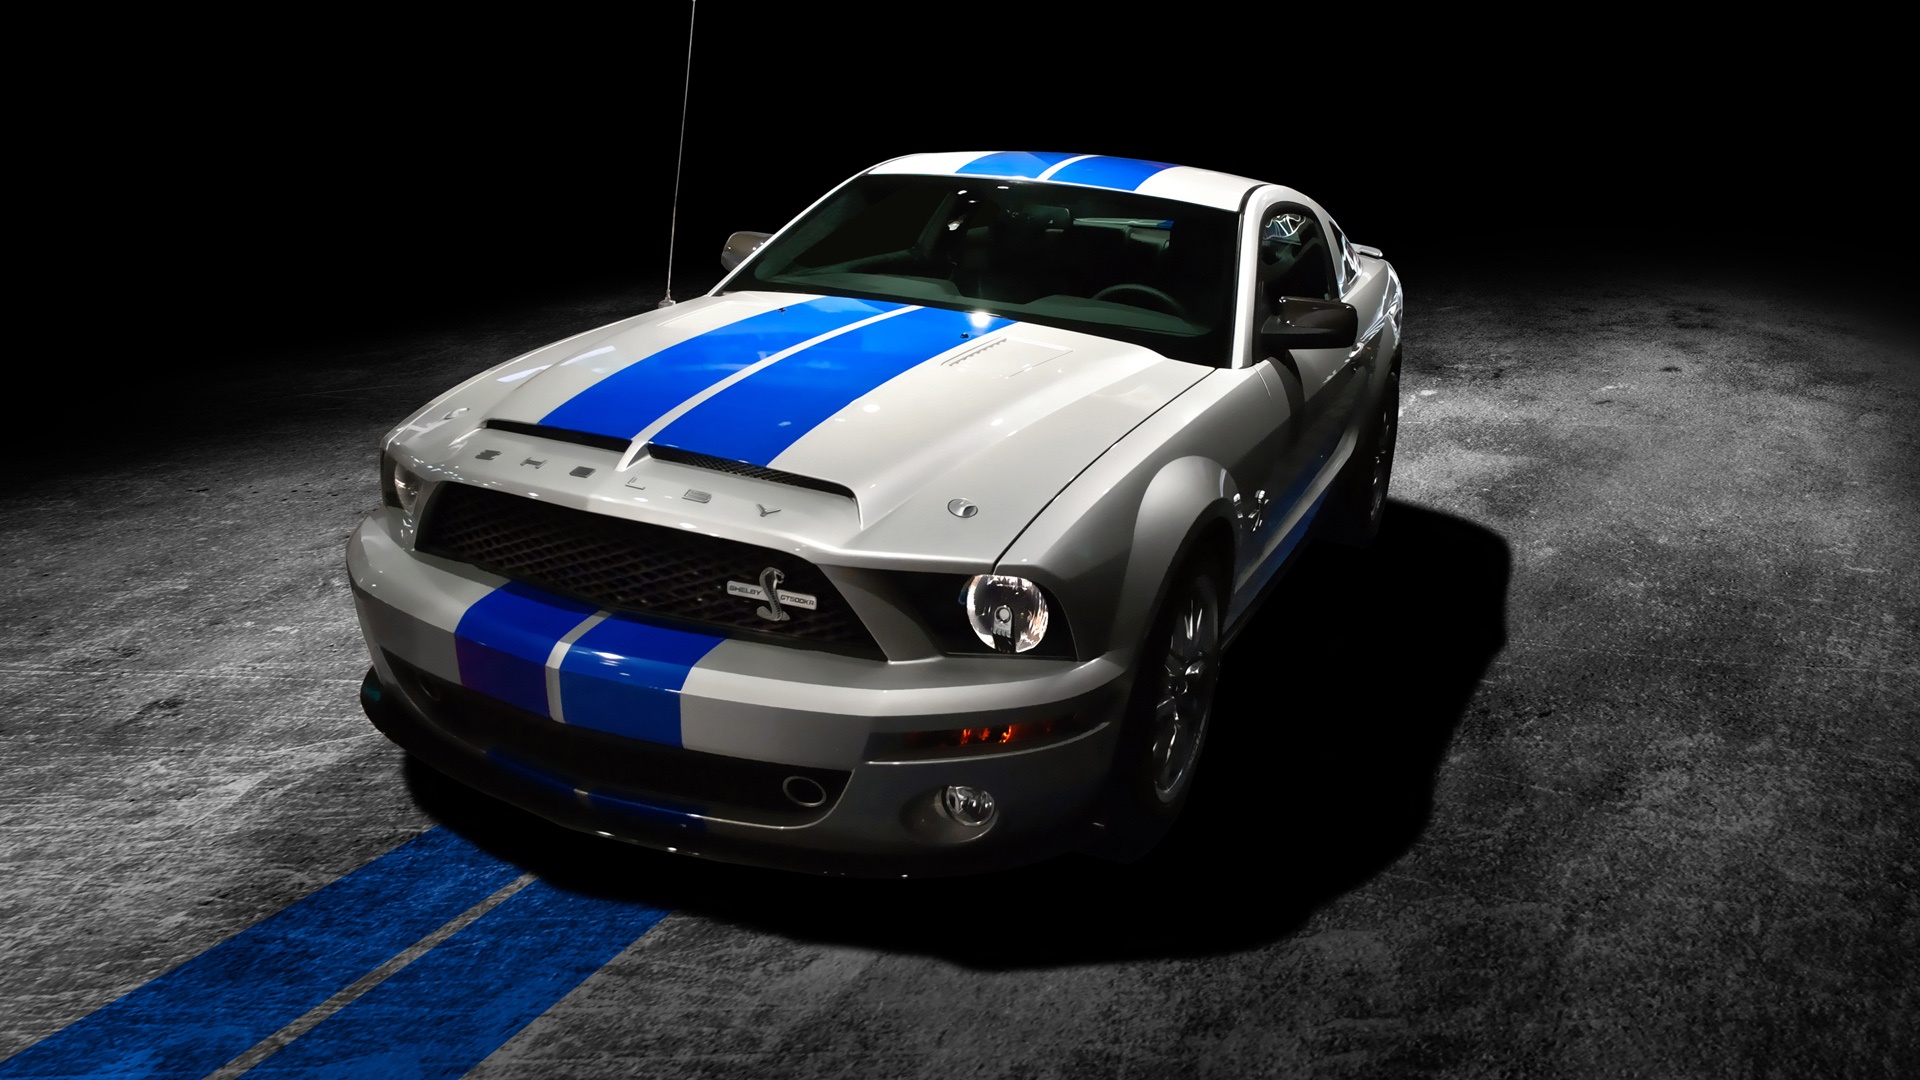 Ford Mustang Shelby Gt500 Wallpaper HD